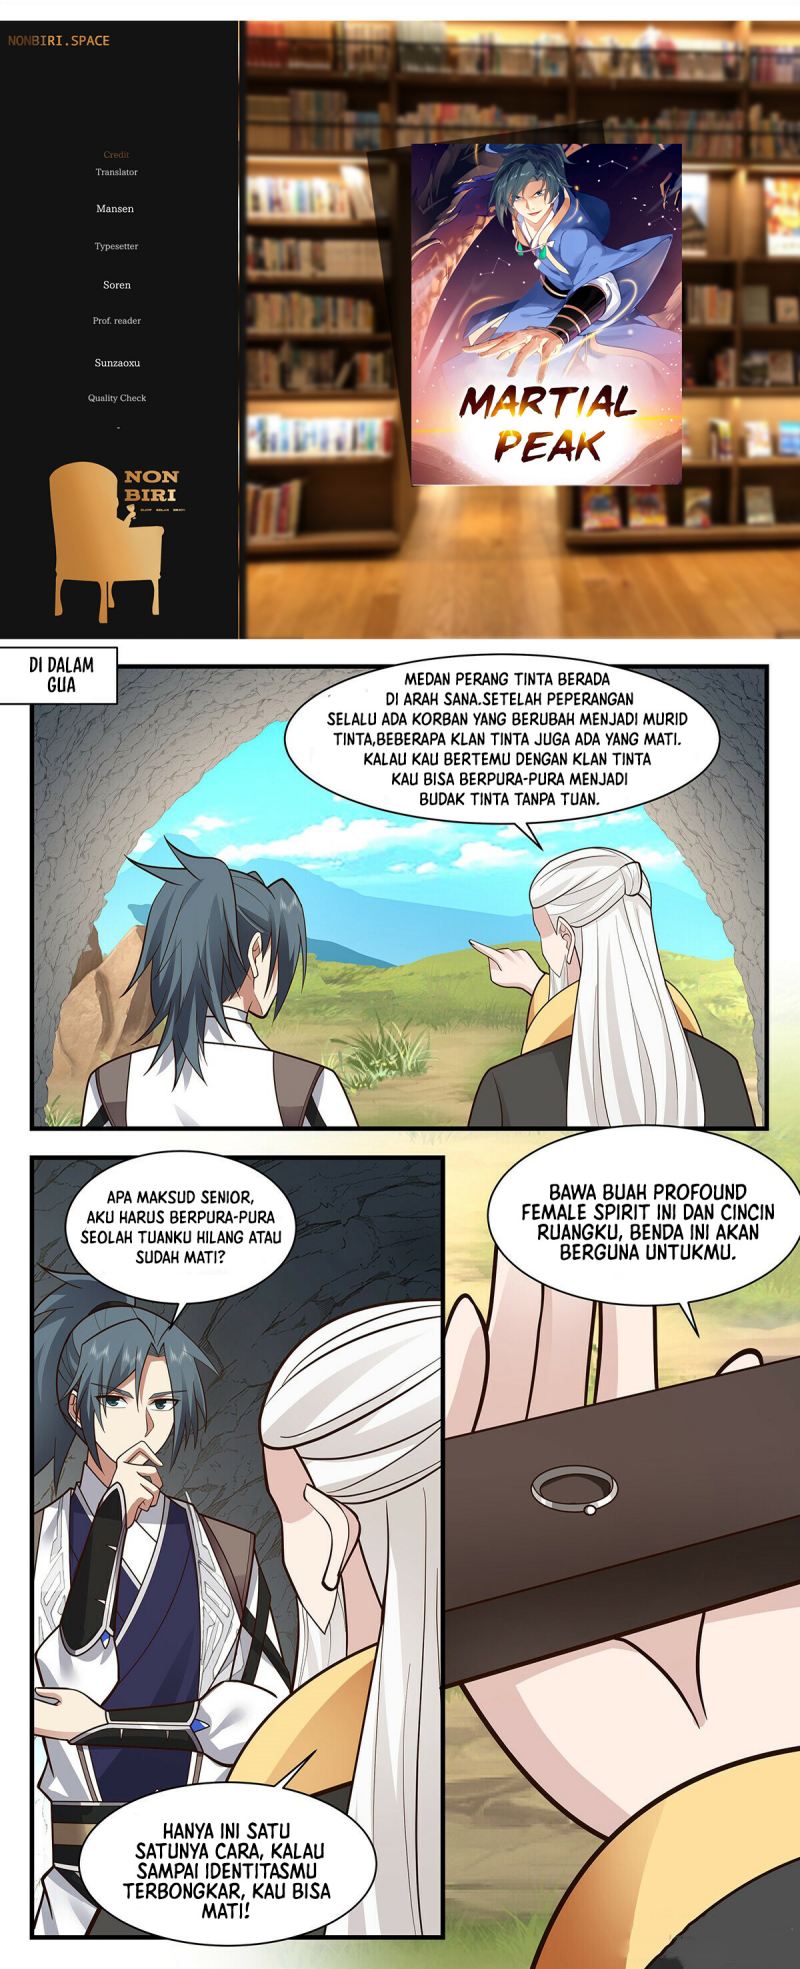 Martial Peak: Chapter 3035 - Page 1